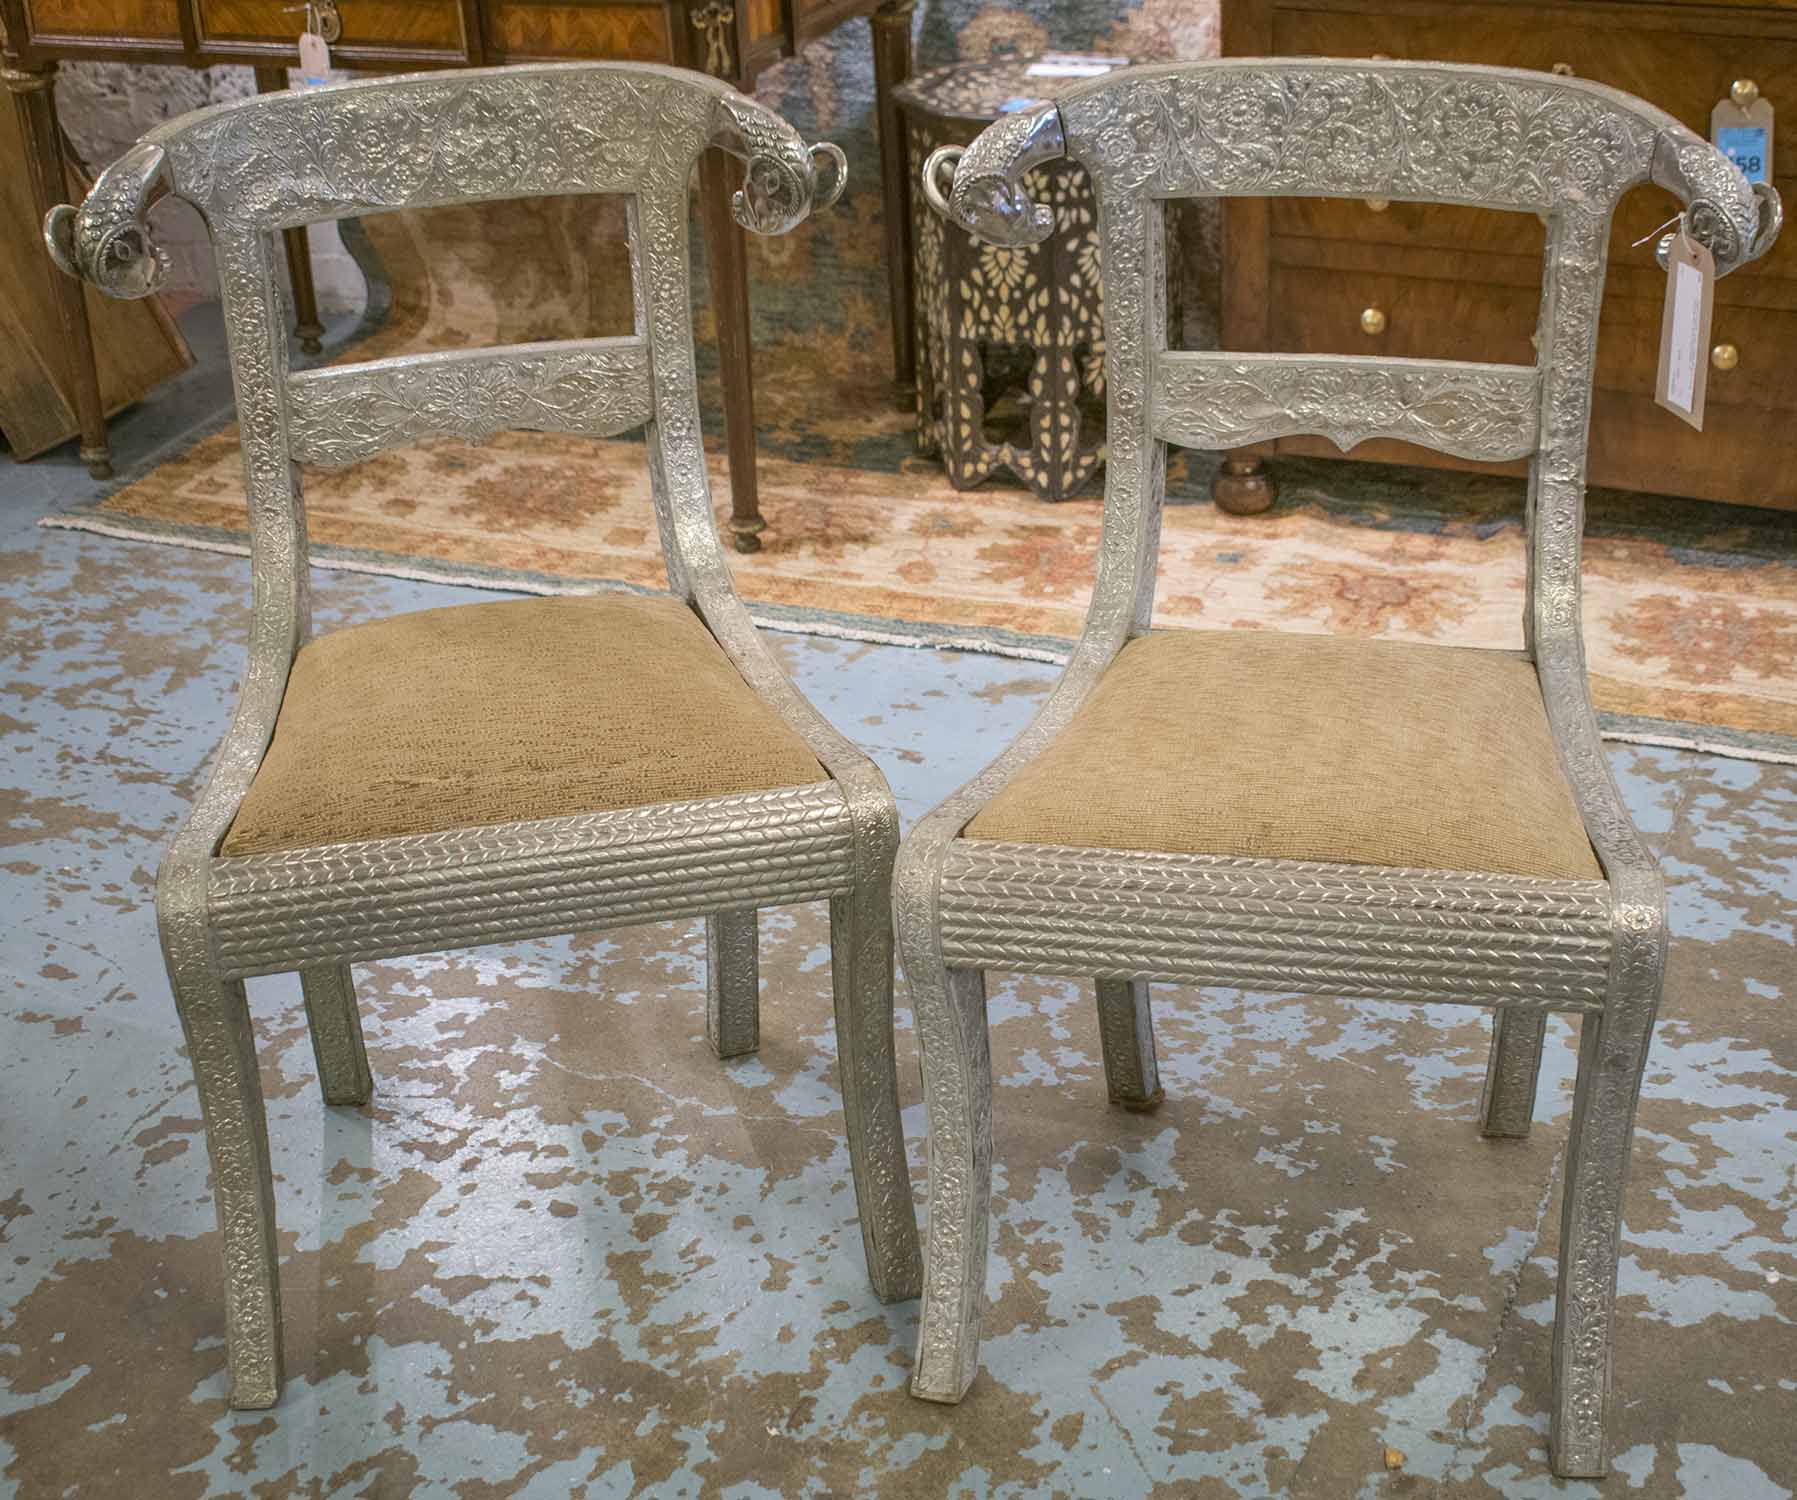 SIDE CHAIRS, a pair, Indian silvered metal covered with rams head backs.